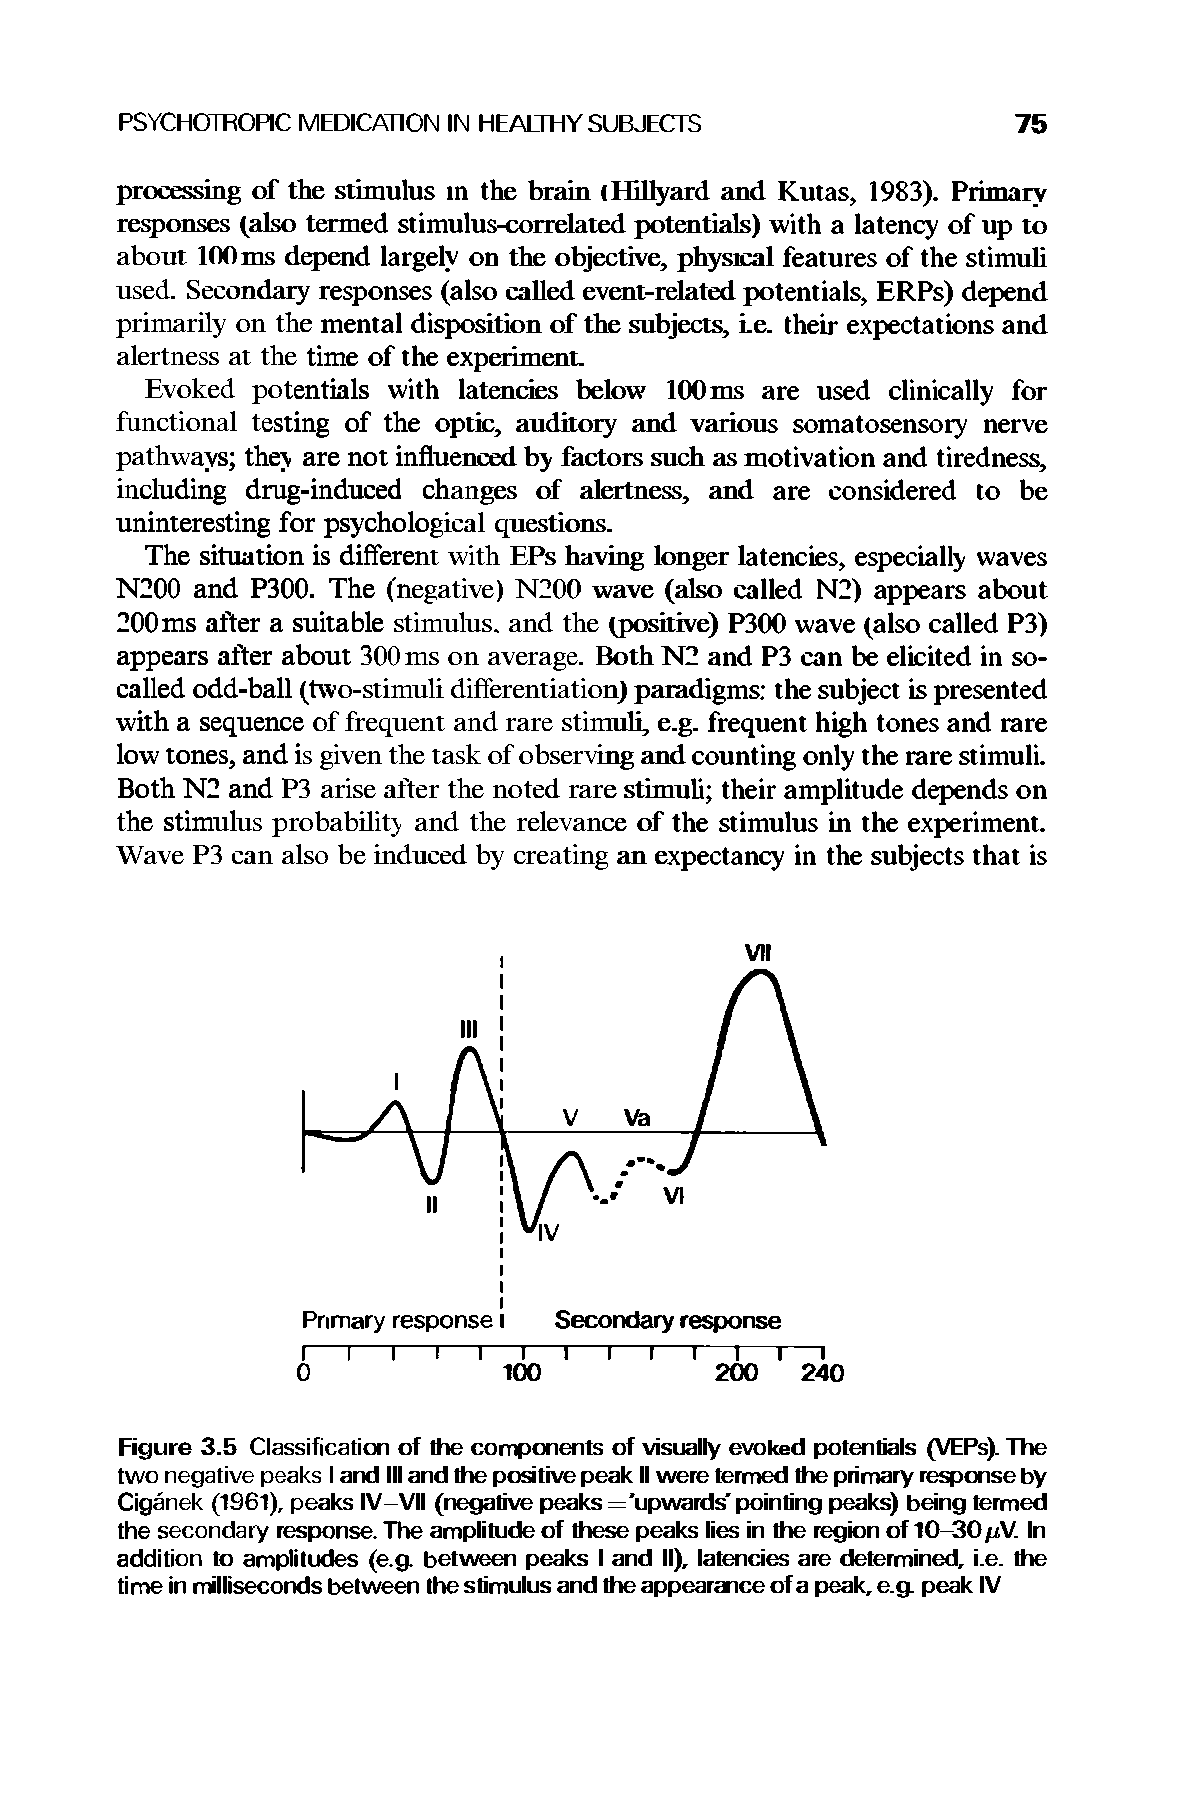 Figure 3.5 Classification of the components of visually evoked potentials (VEPs). The two negative peaks I and III and the positive peak II were termed the primary response by Ciganek (1961), peaks IV-VII (negative peaks = upwards pointing peaks) being termed the secondary response. The amplitude of these peaks lies in the region of 10-30/iV. In addition to amplitudes (e.g. between peaks I and II), latencies are determined, i.e. the time in milliseconds between the stimulus and the appearance of a peak, e.g. peak IV...